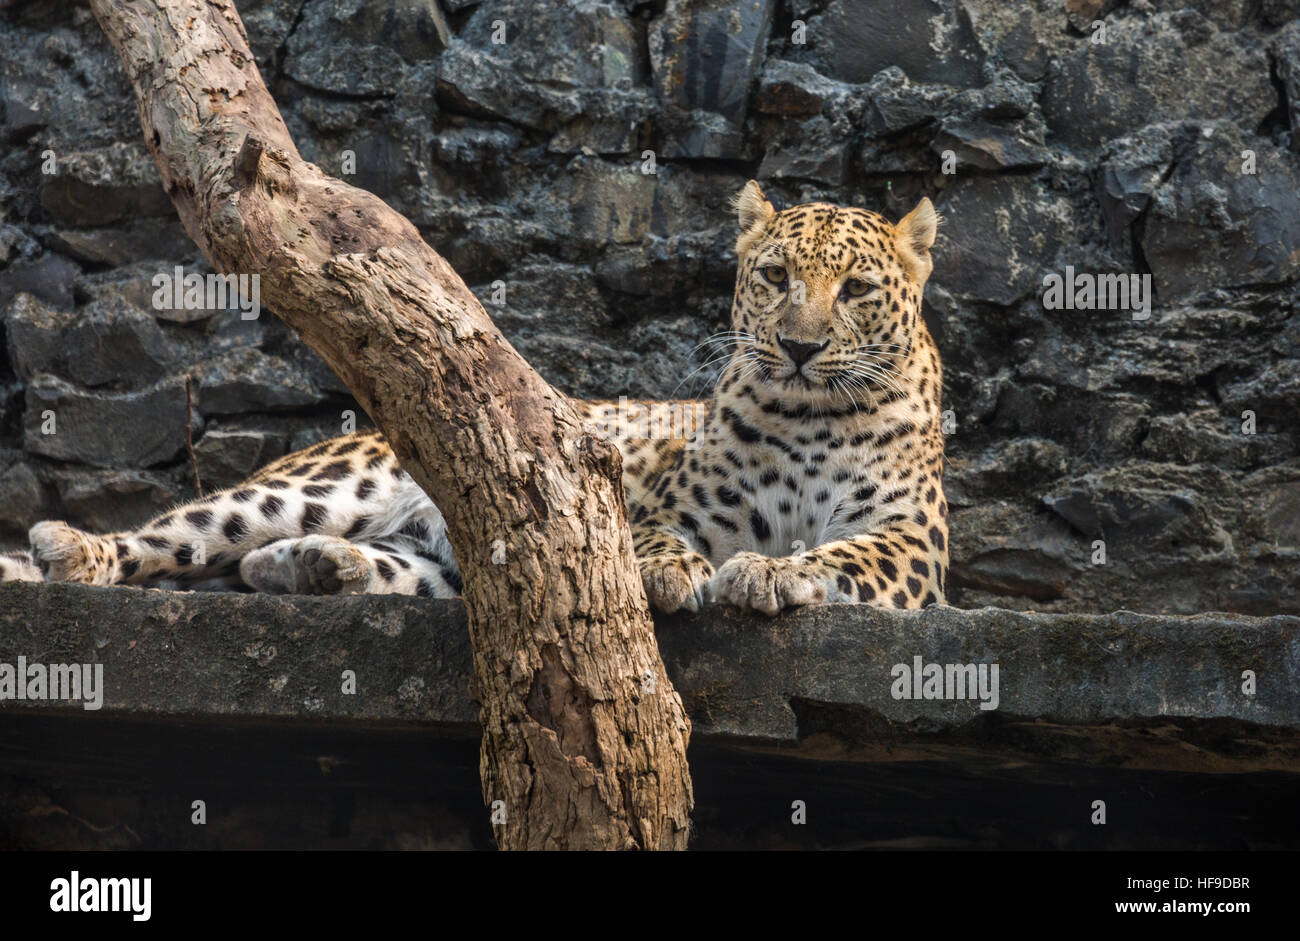 Male Indian leopard in his enclosure at an Indian zoo. Stock Photo